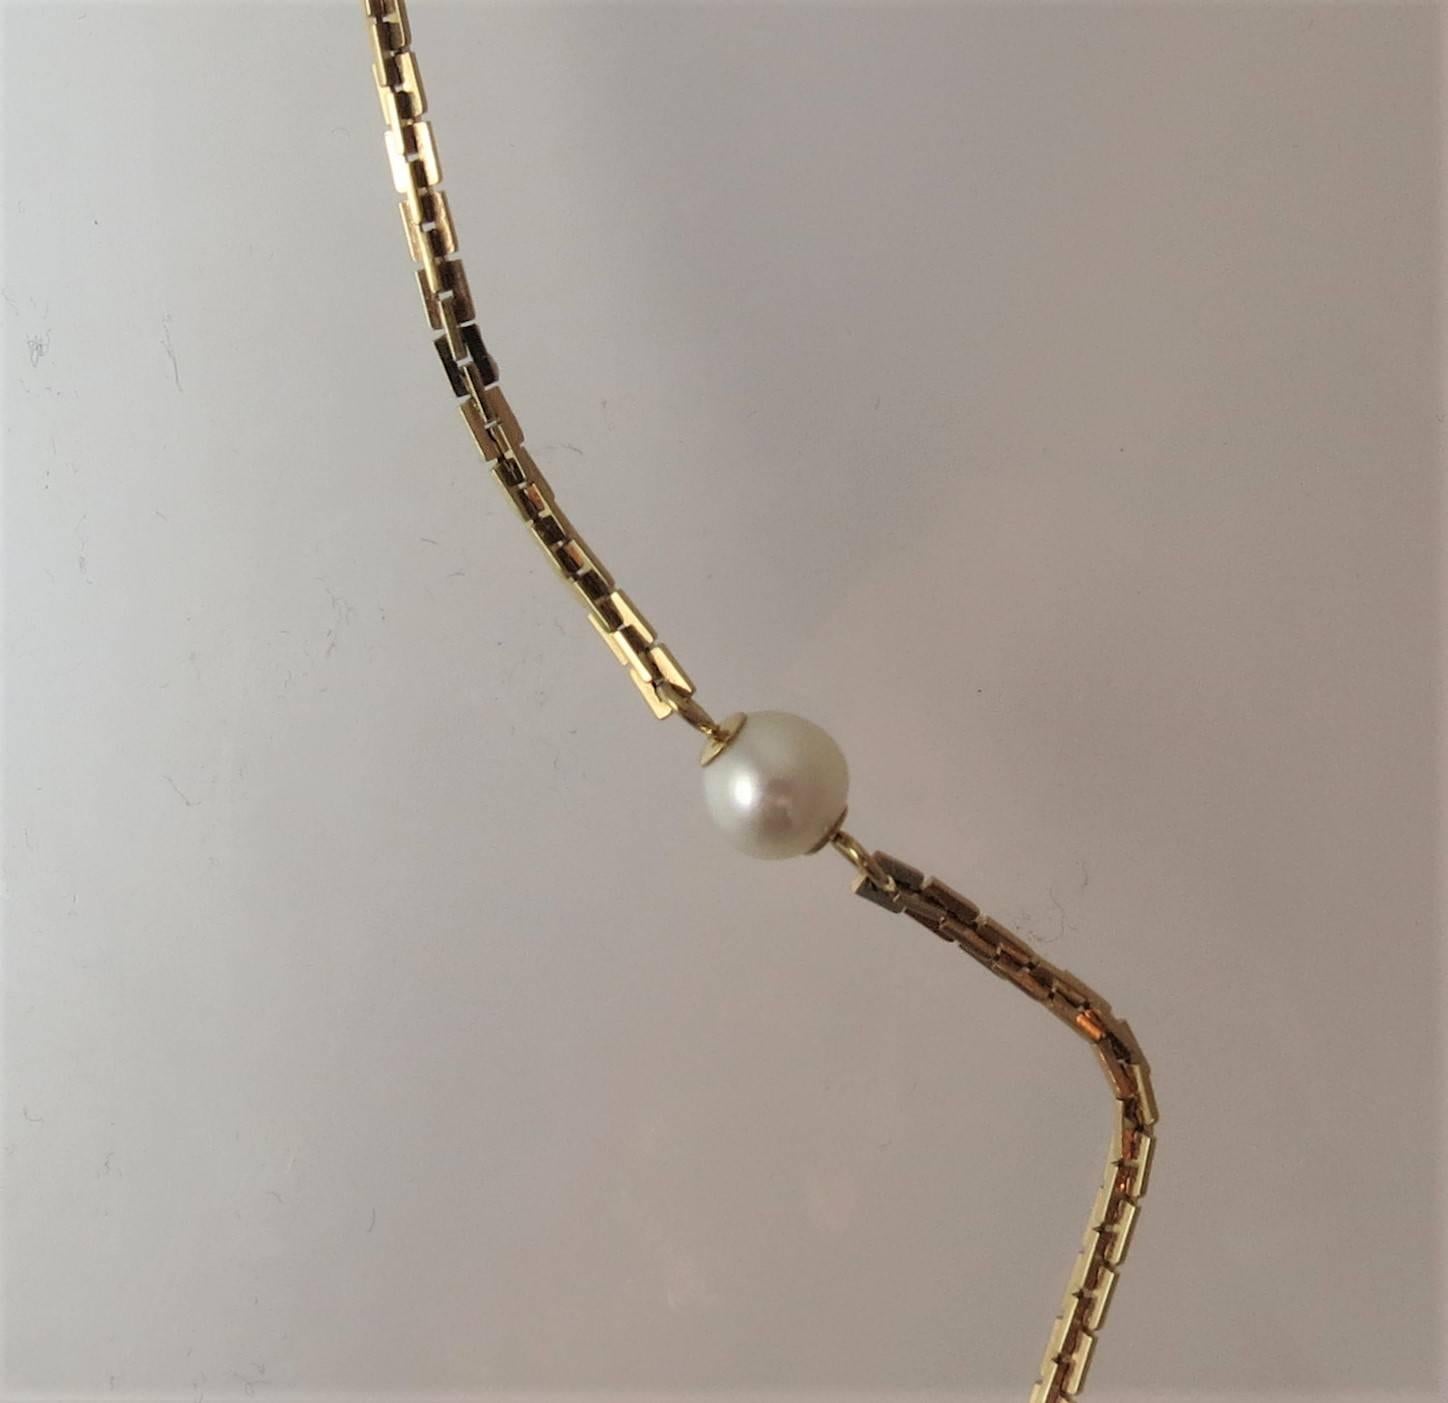 Tiffany 14K yellow gold neck chain with 7 cultured pearls, measuring 6.4-6.7mm, length of chain 29 inches